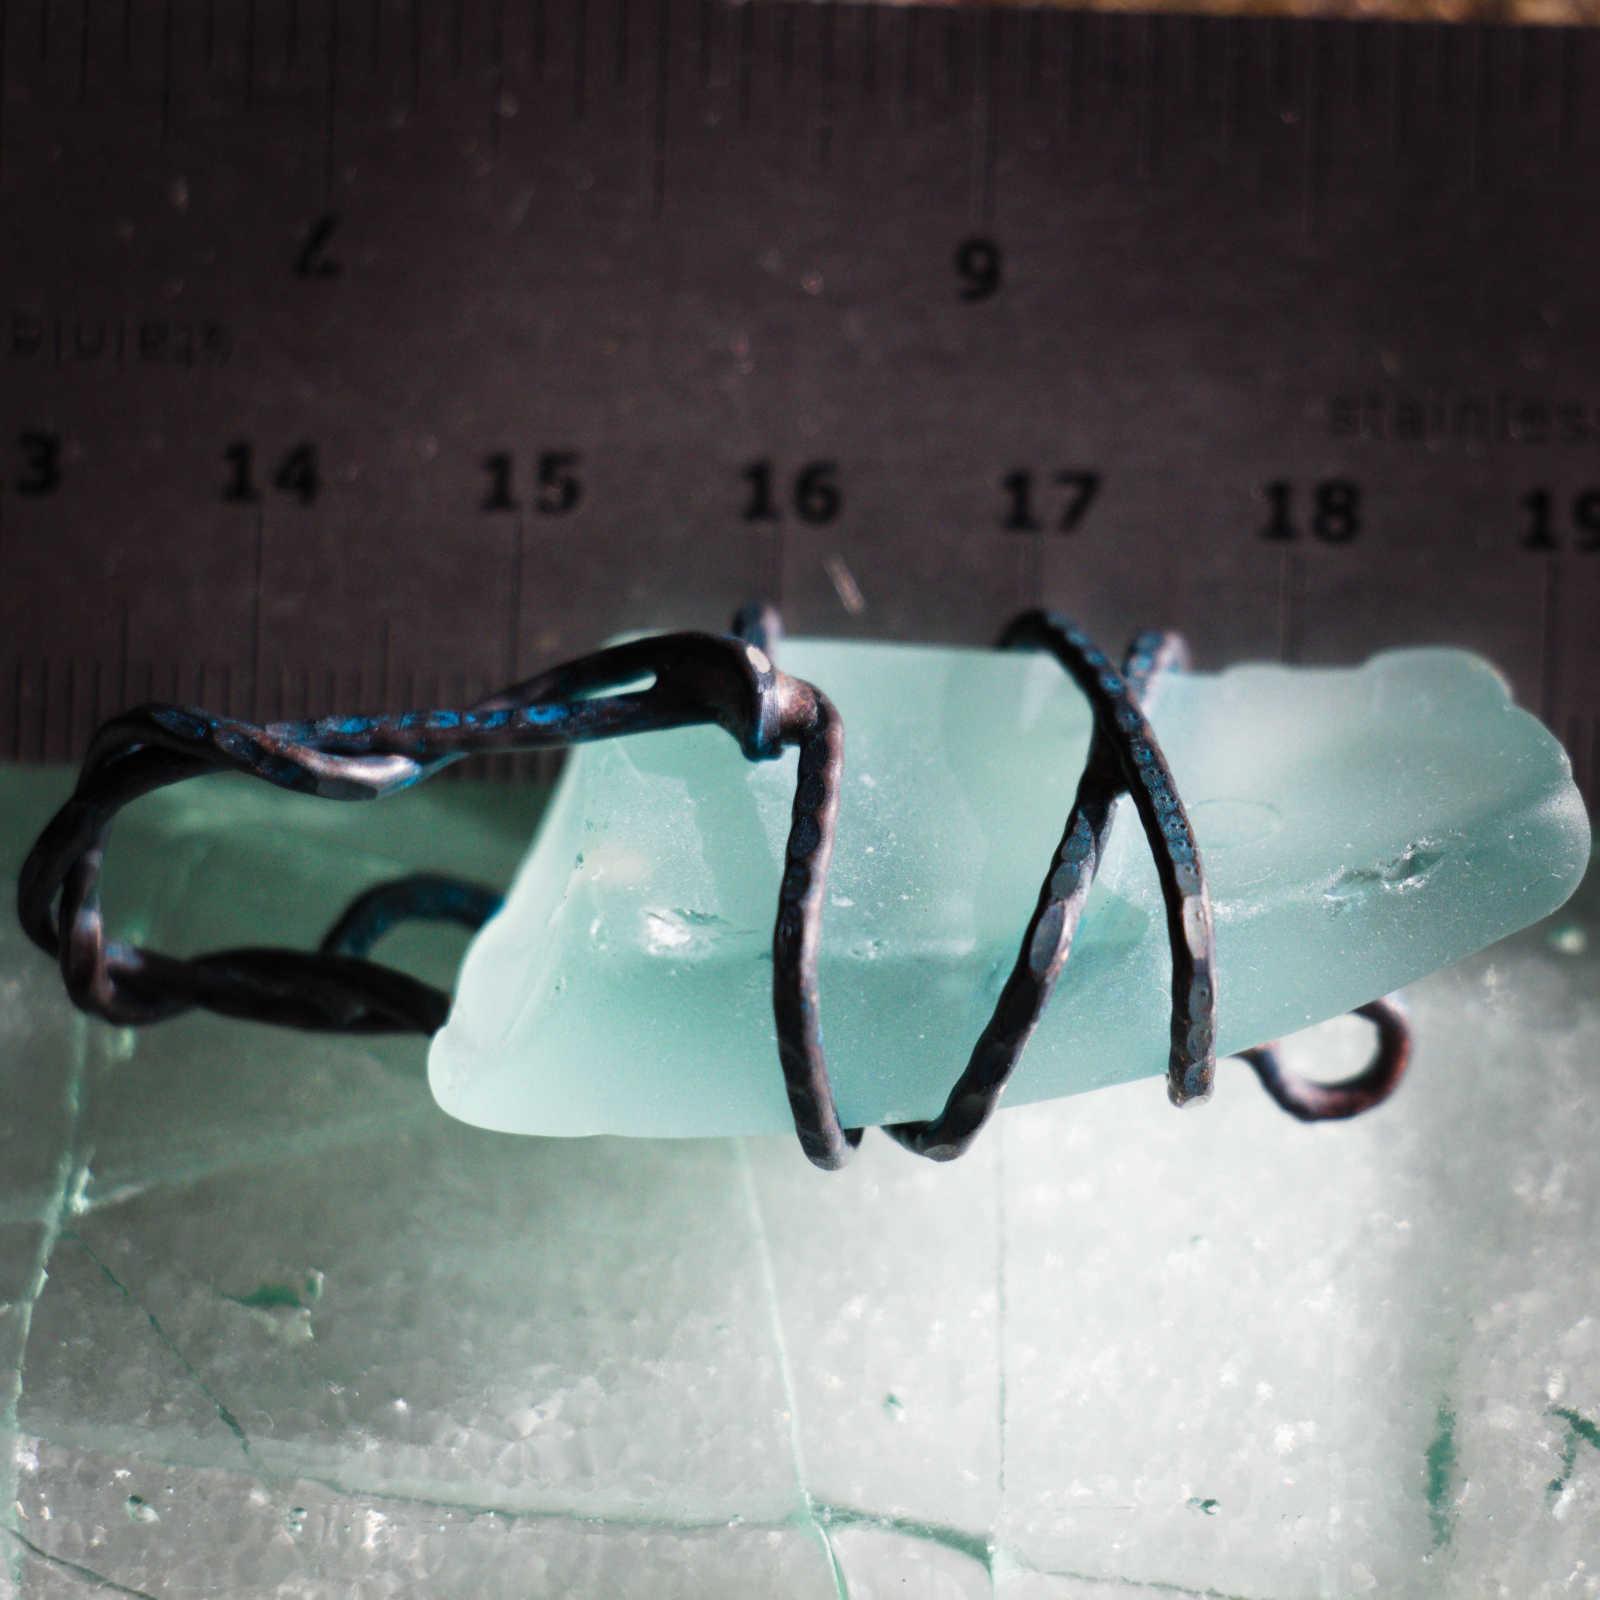 sea glass accessory with ruler to show scale